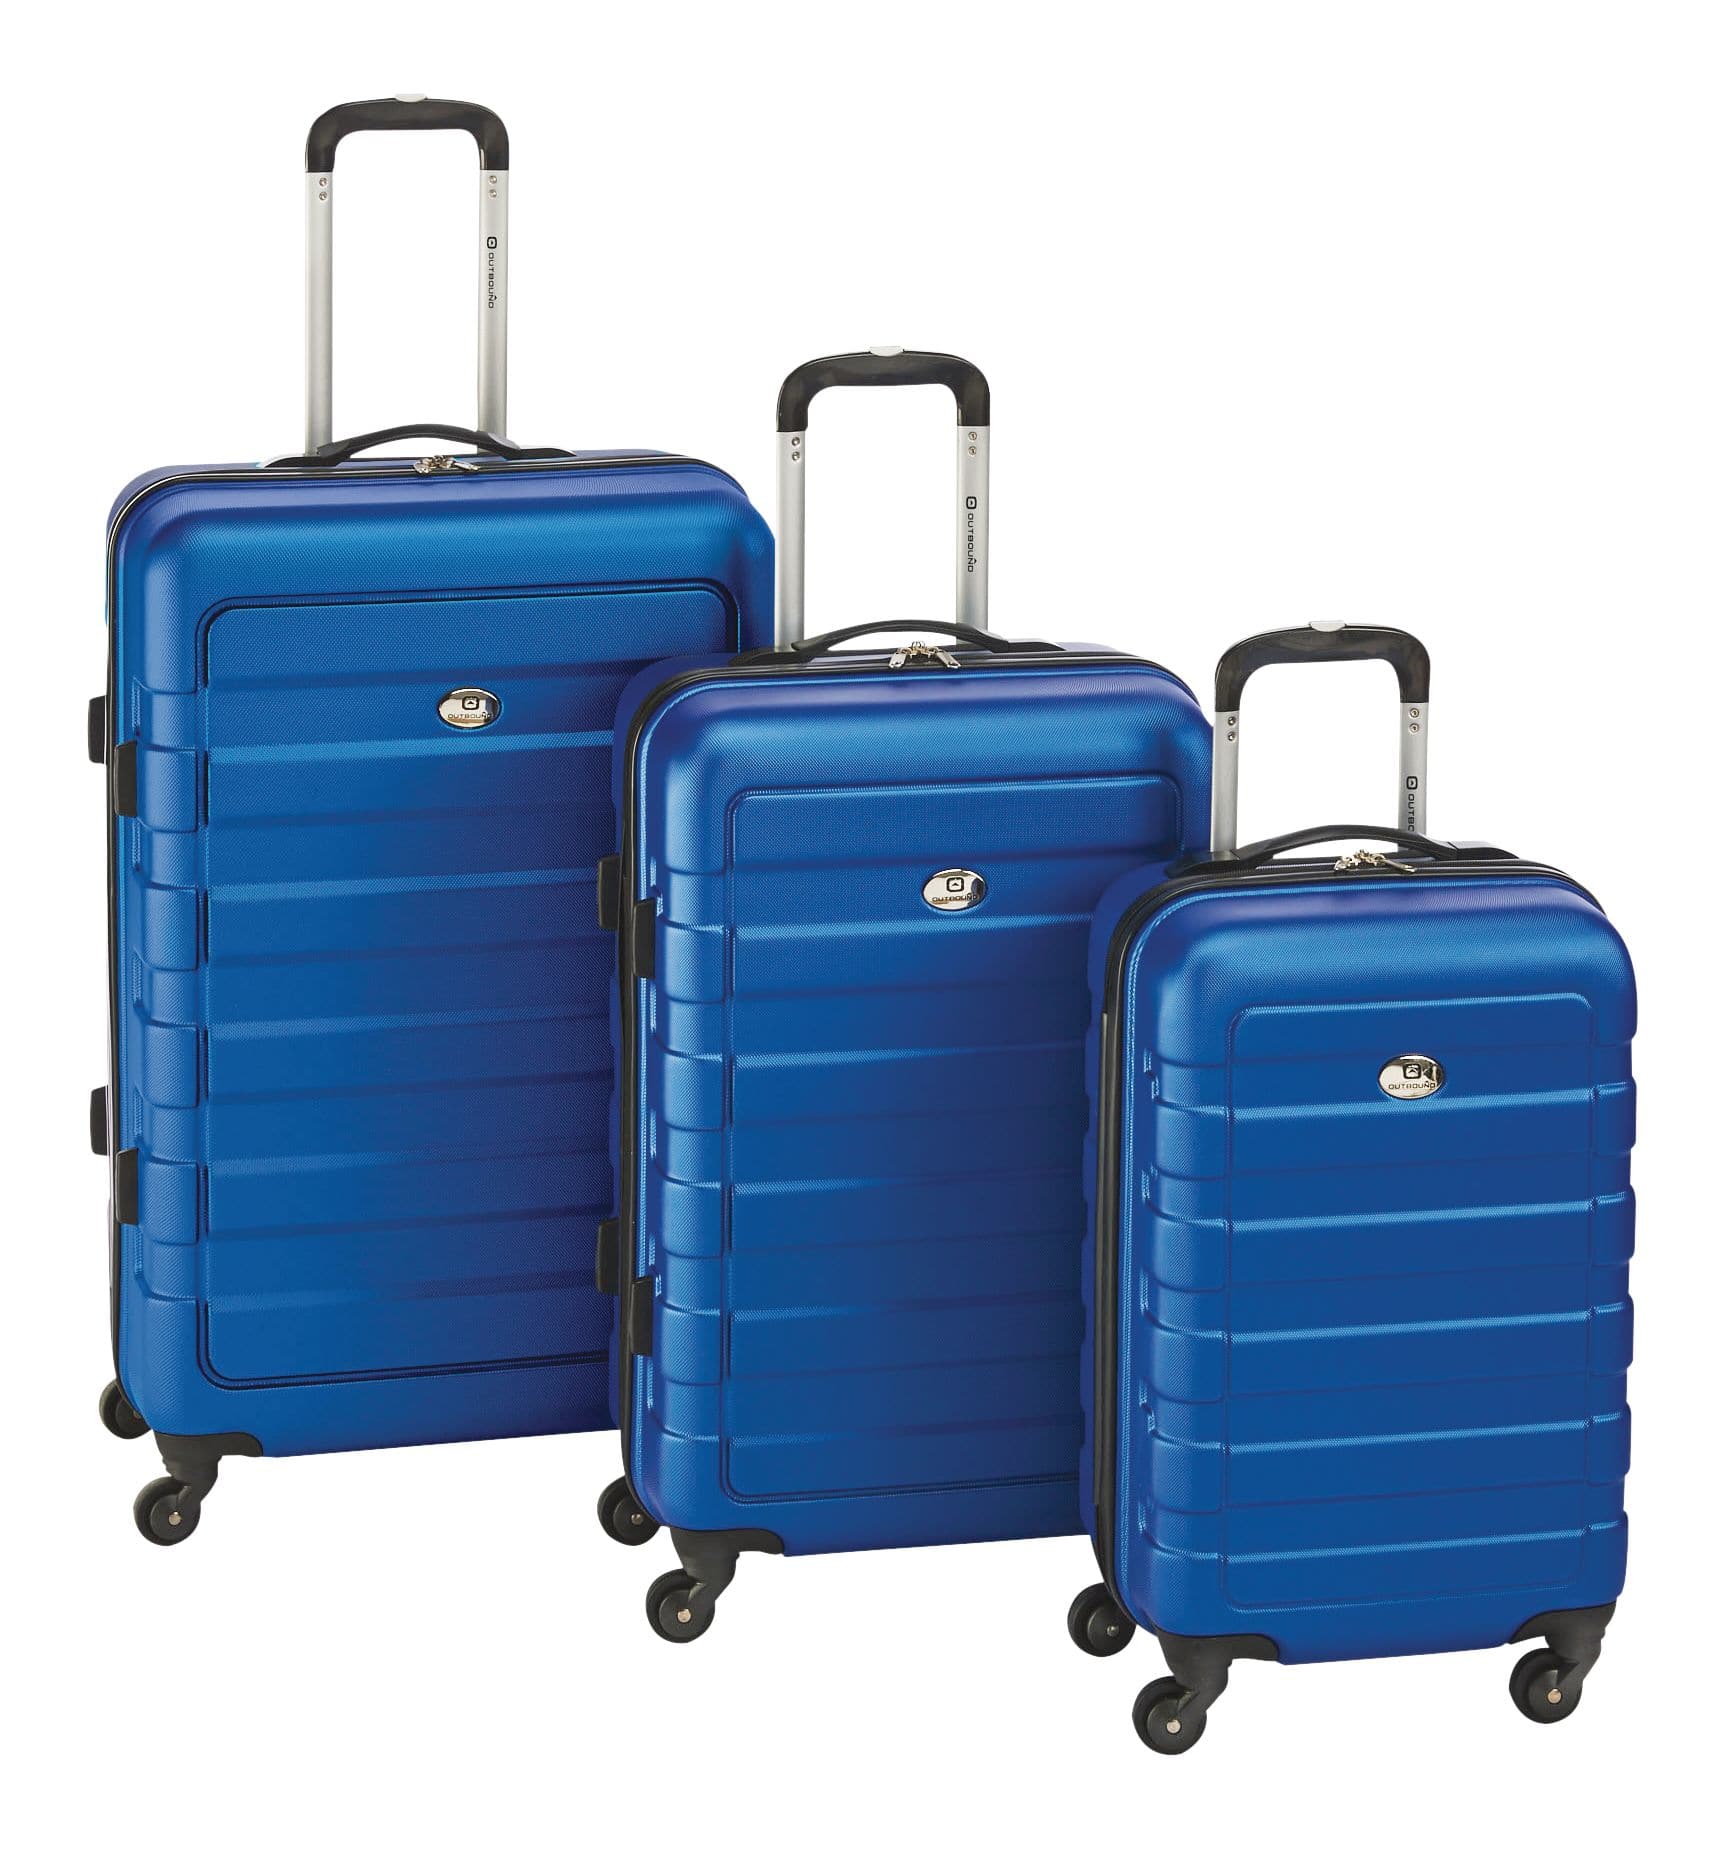 Outbound 3-Piece Hardside Spinner Wheel Travel Luggage Suitcase Set